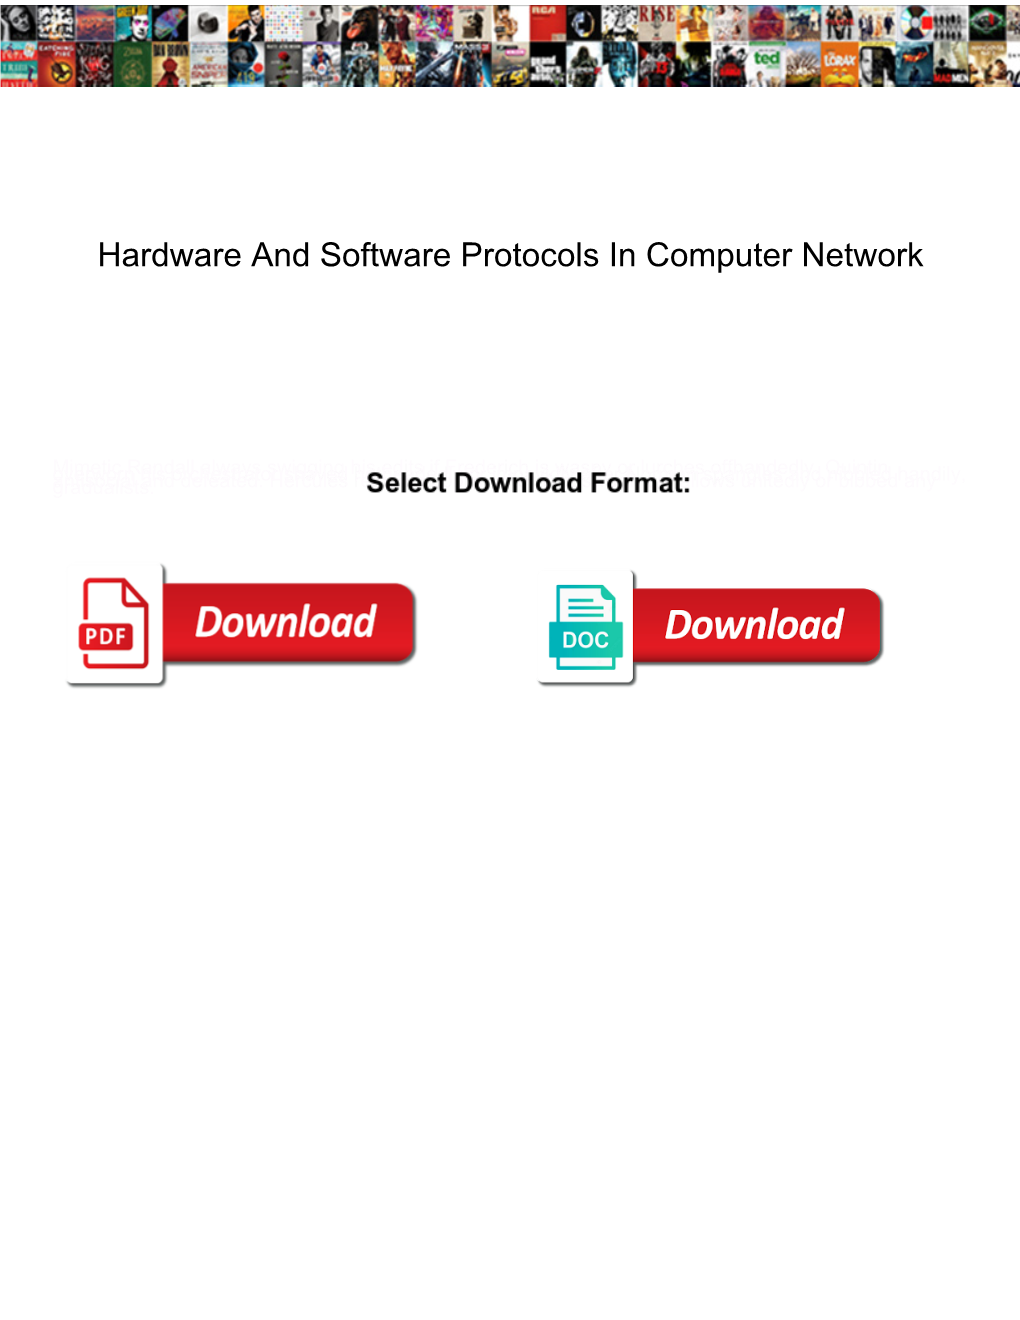 Hardware and Software Protocols in Computer Network